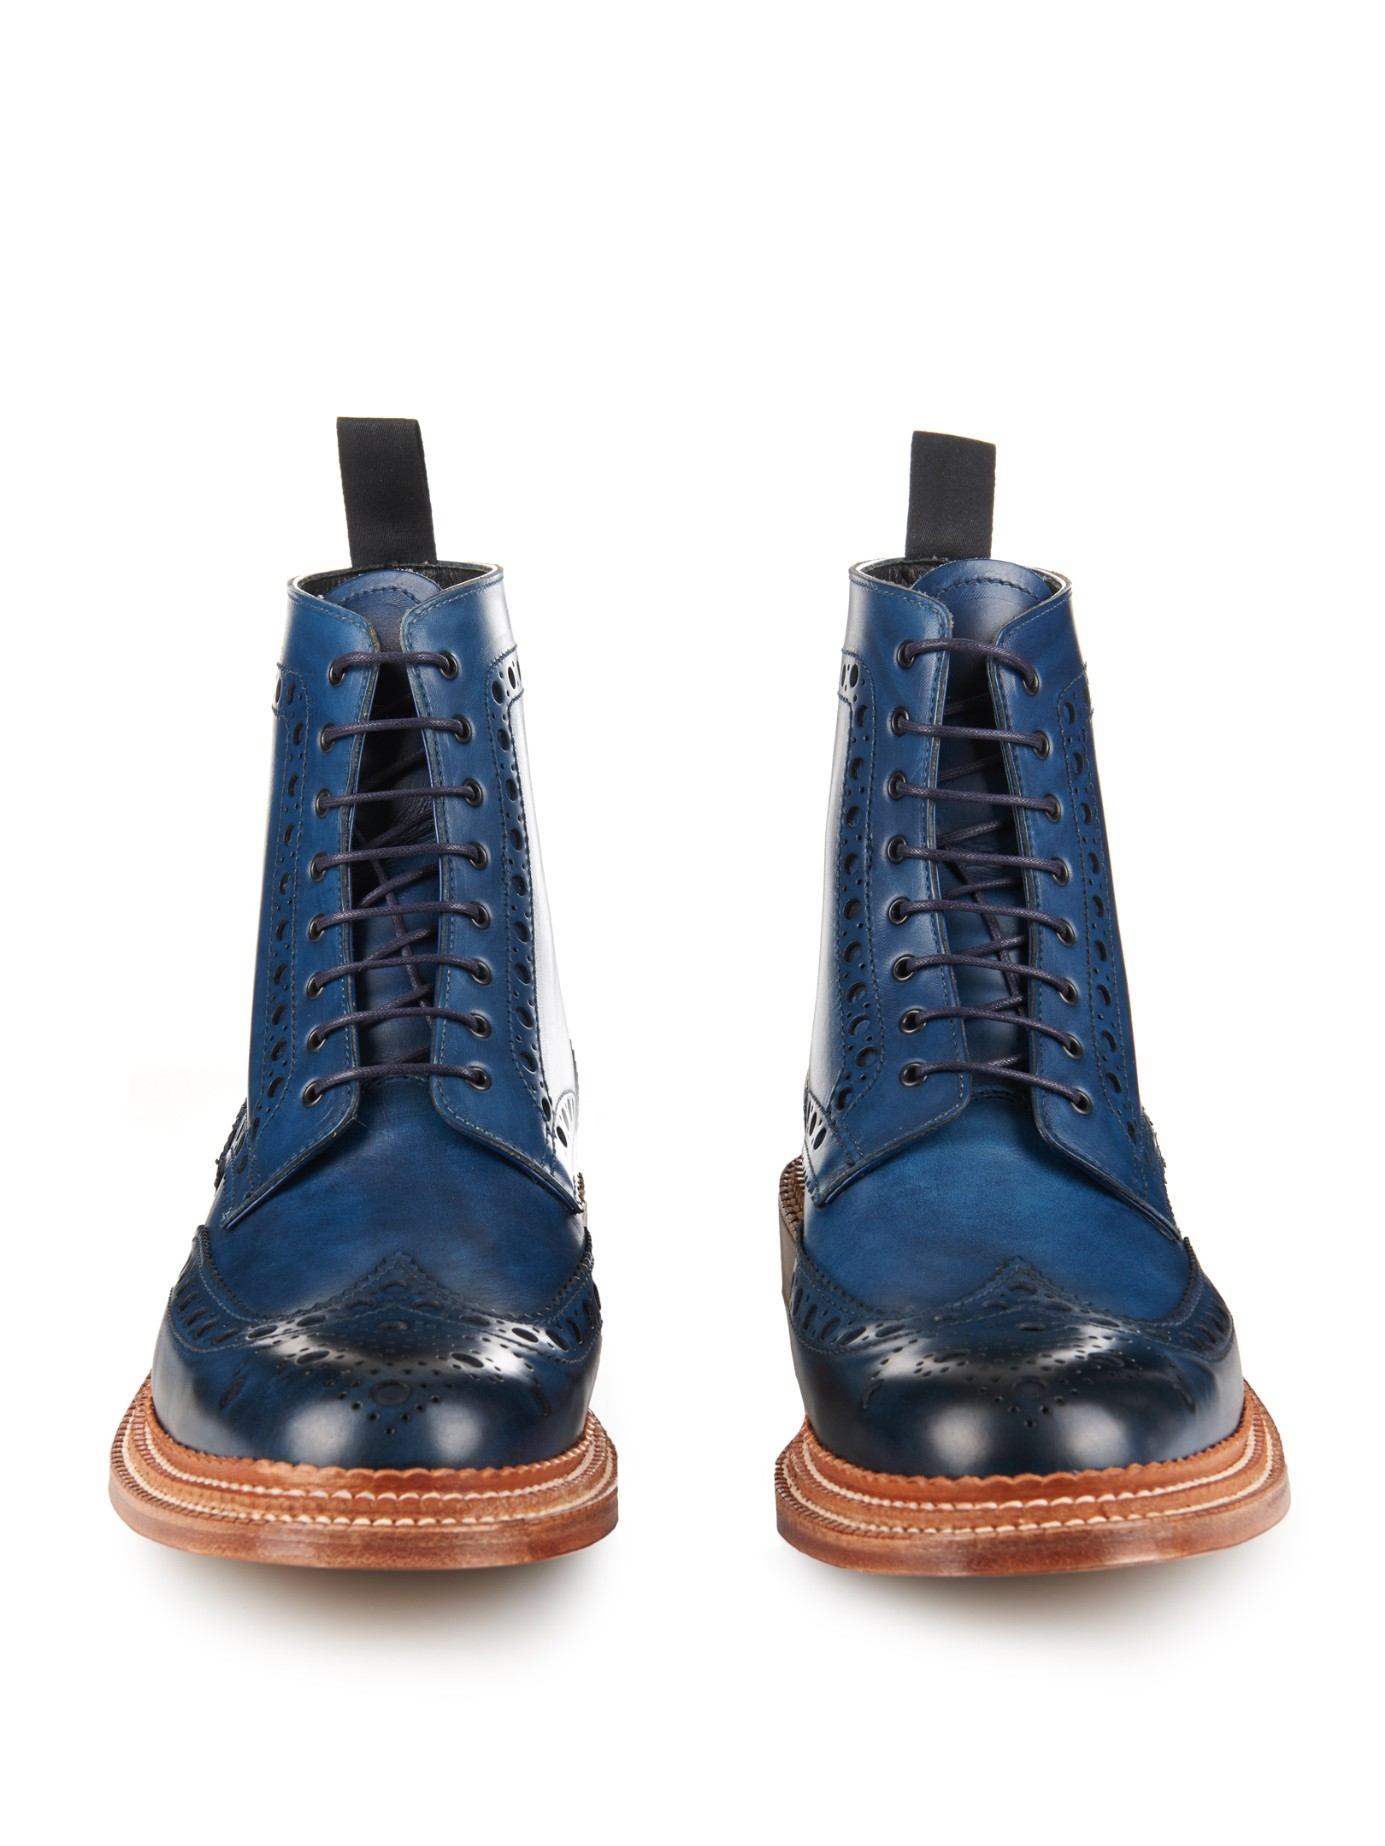 Sleeping leisure Receiver Foot The Coacher Fred Leather Brogue Boots in Navy (Blue) for Men | Lyst